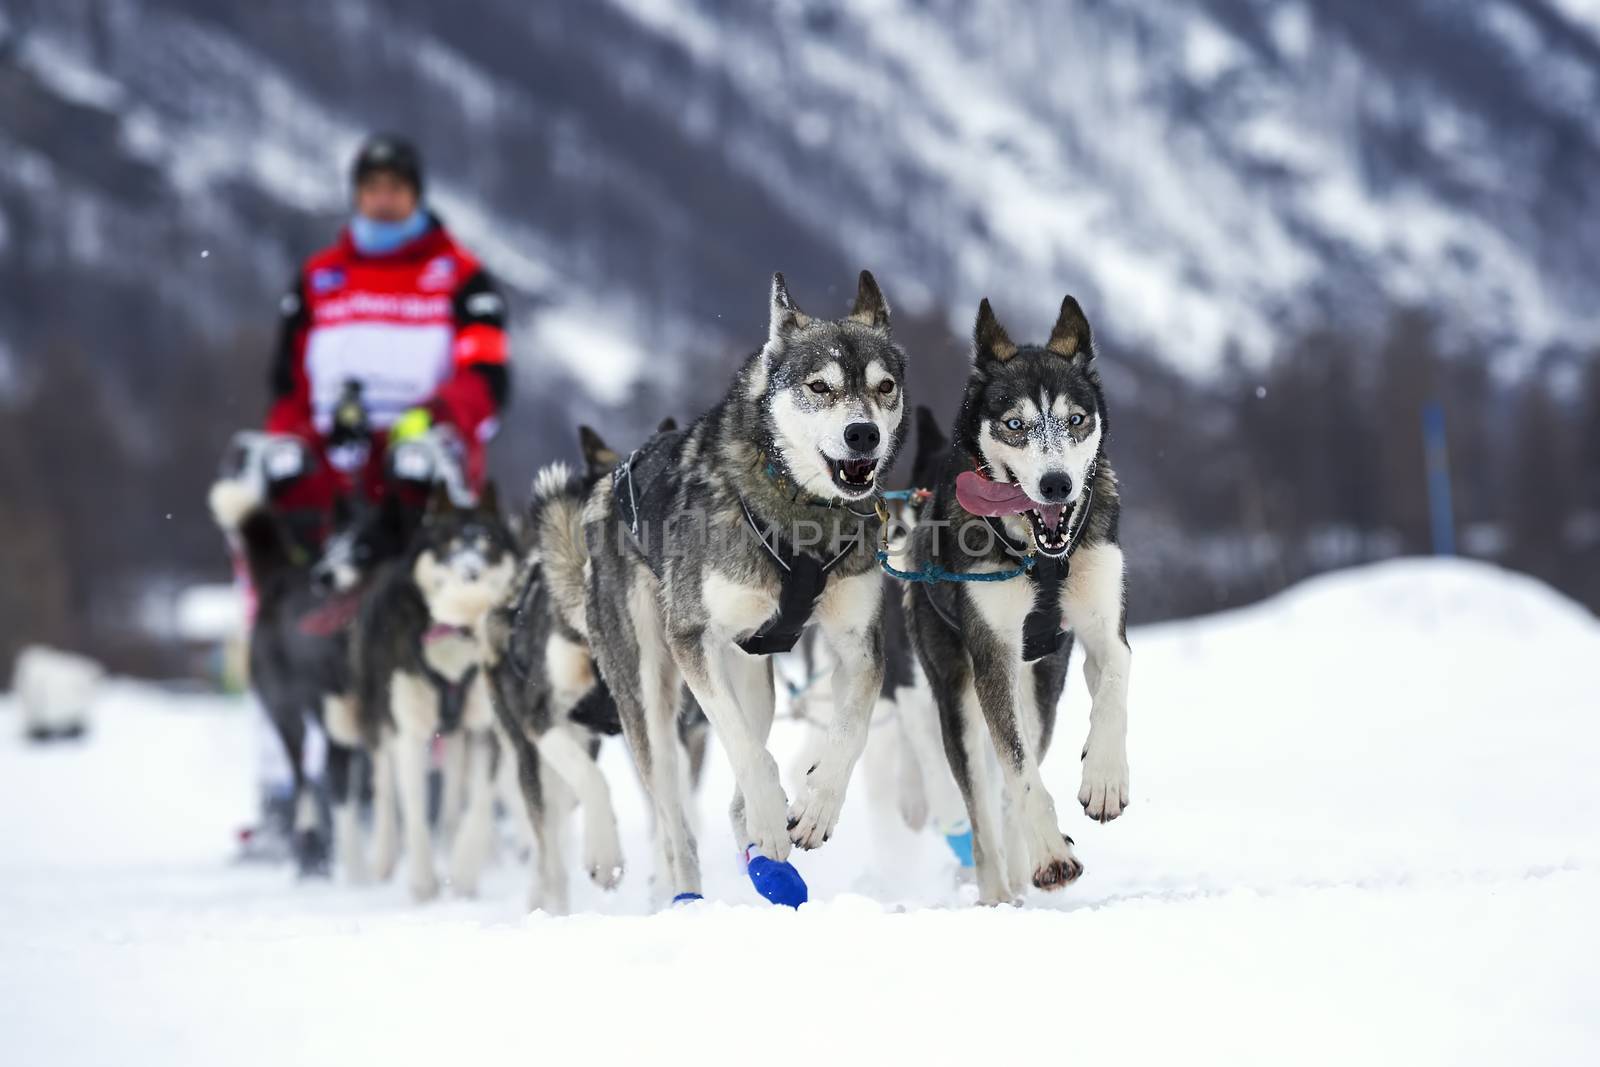 Sled dog race on snow in France, Europe.